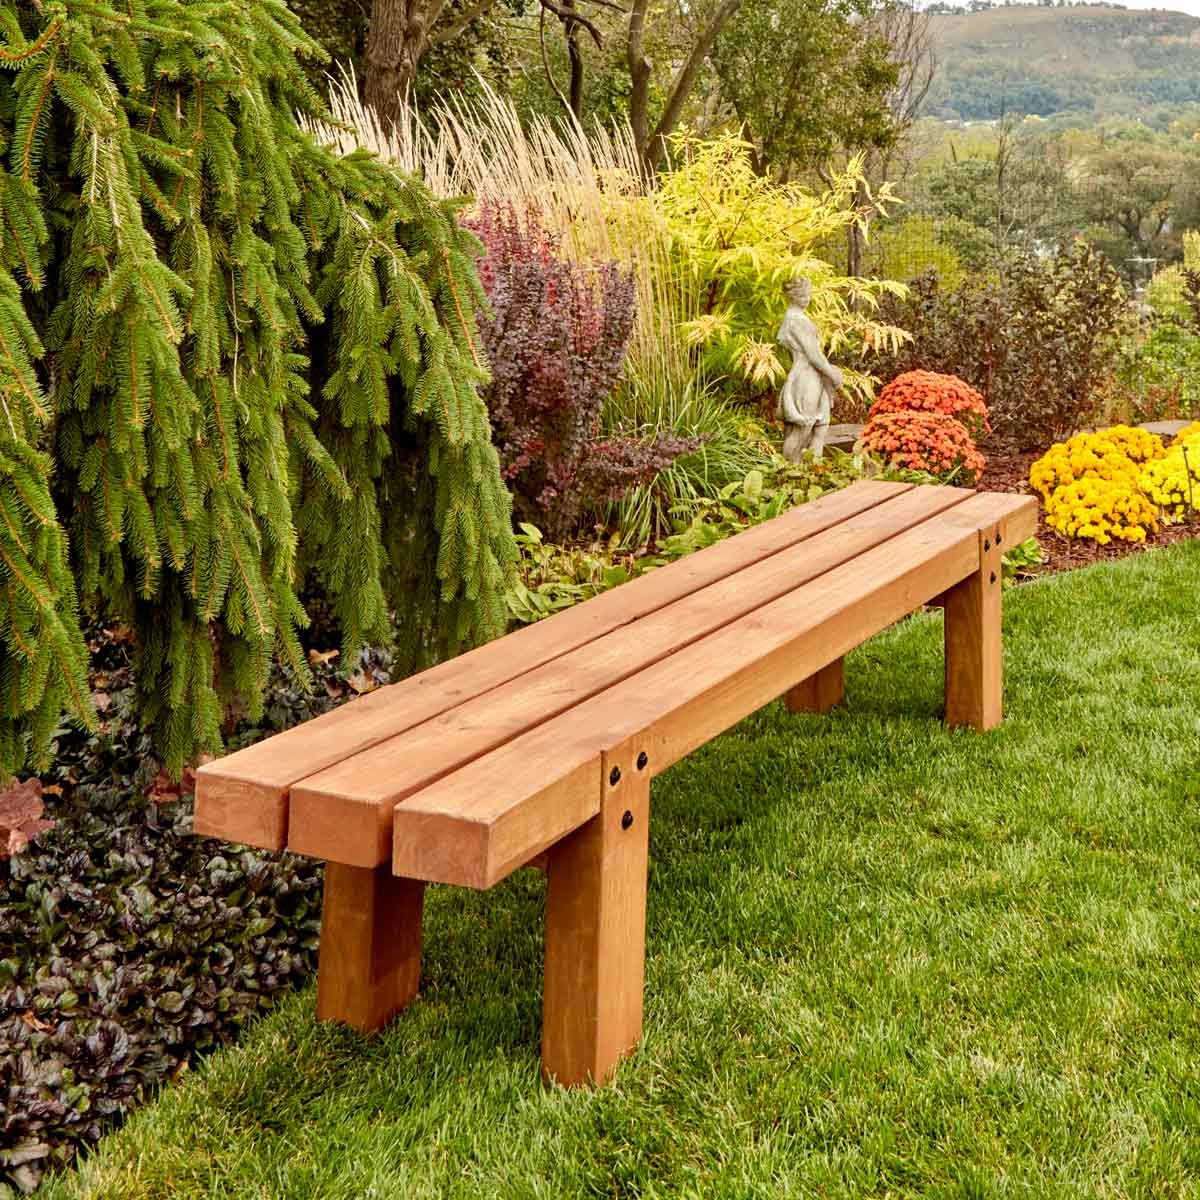 How to Make Simple Timber Bench — The Family Handyman